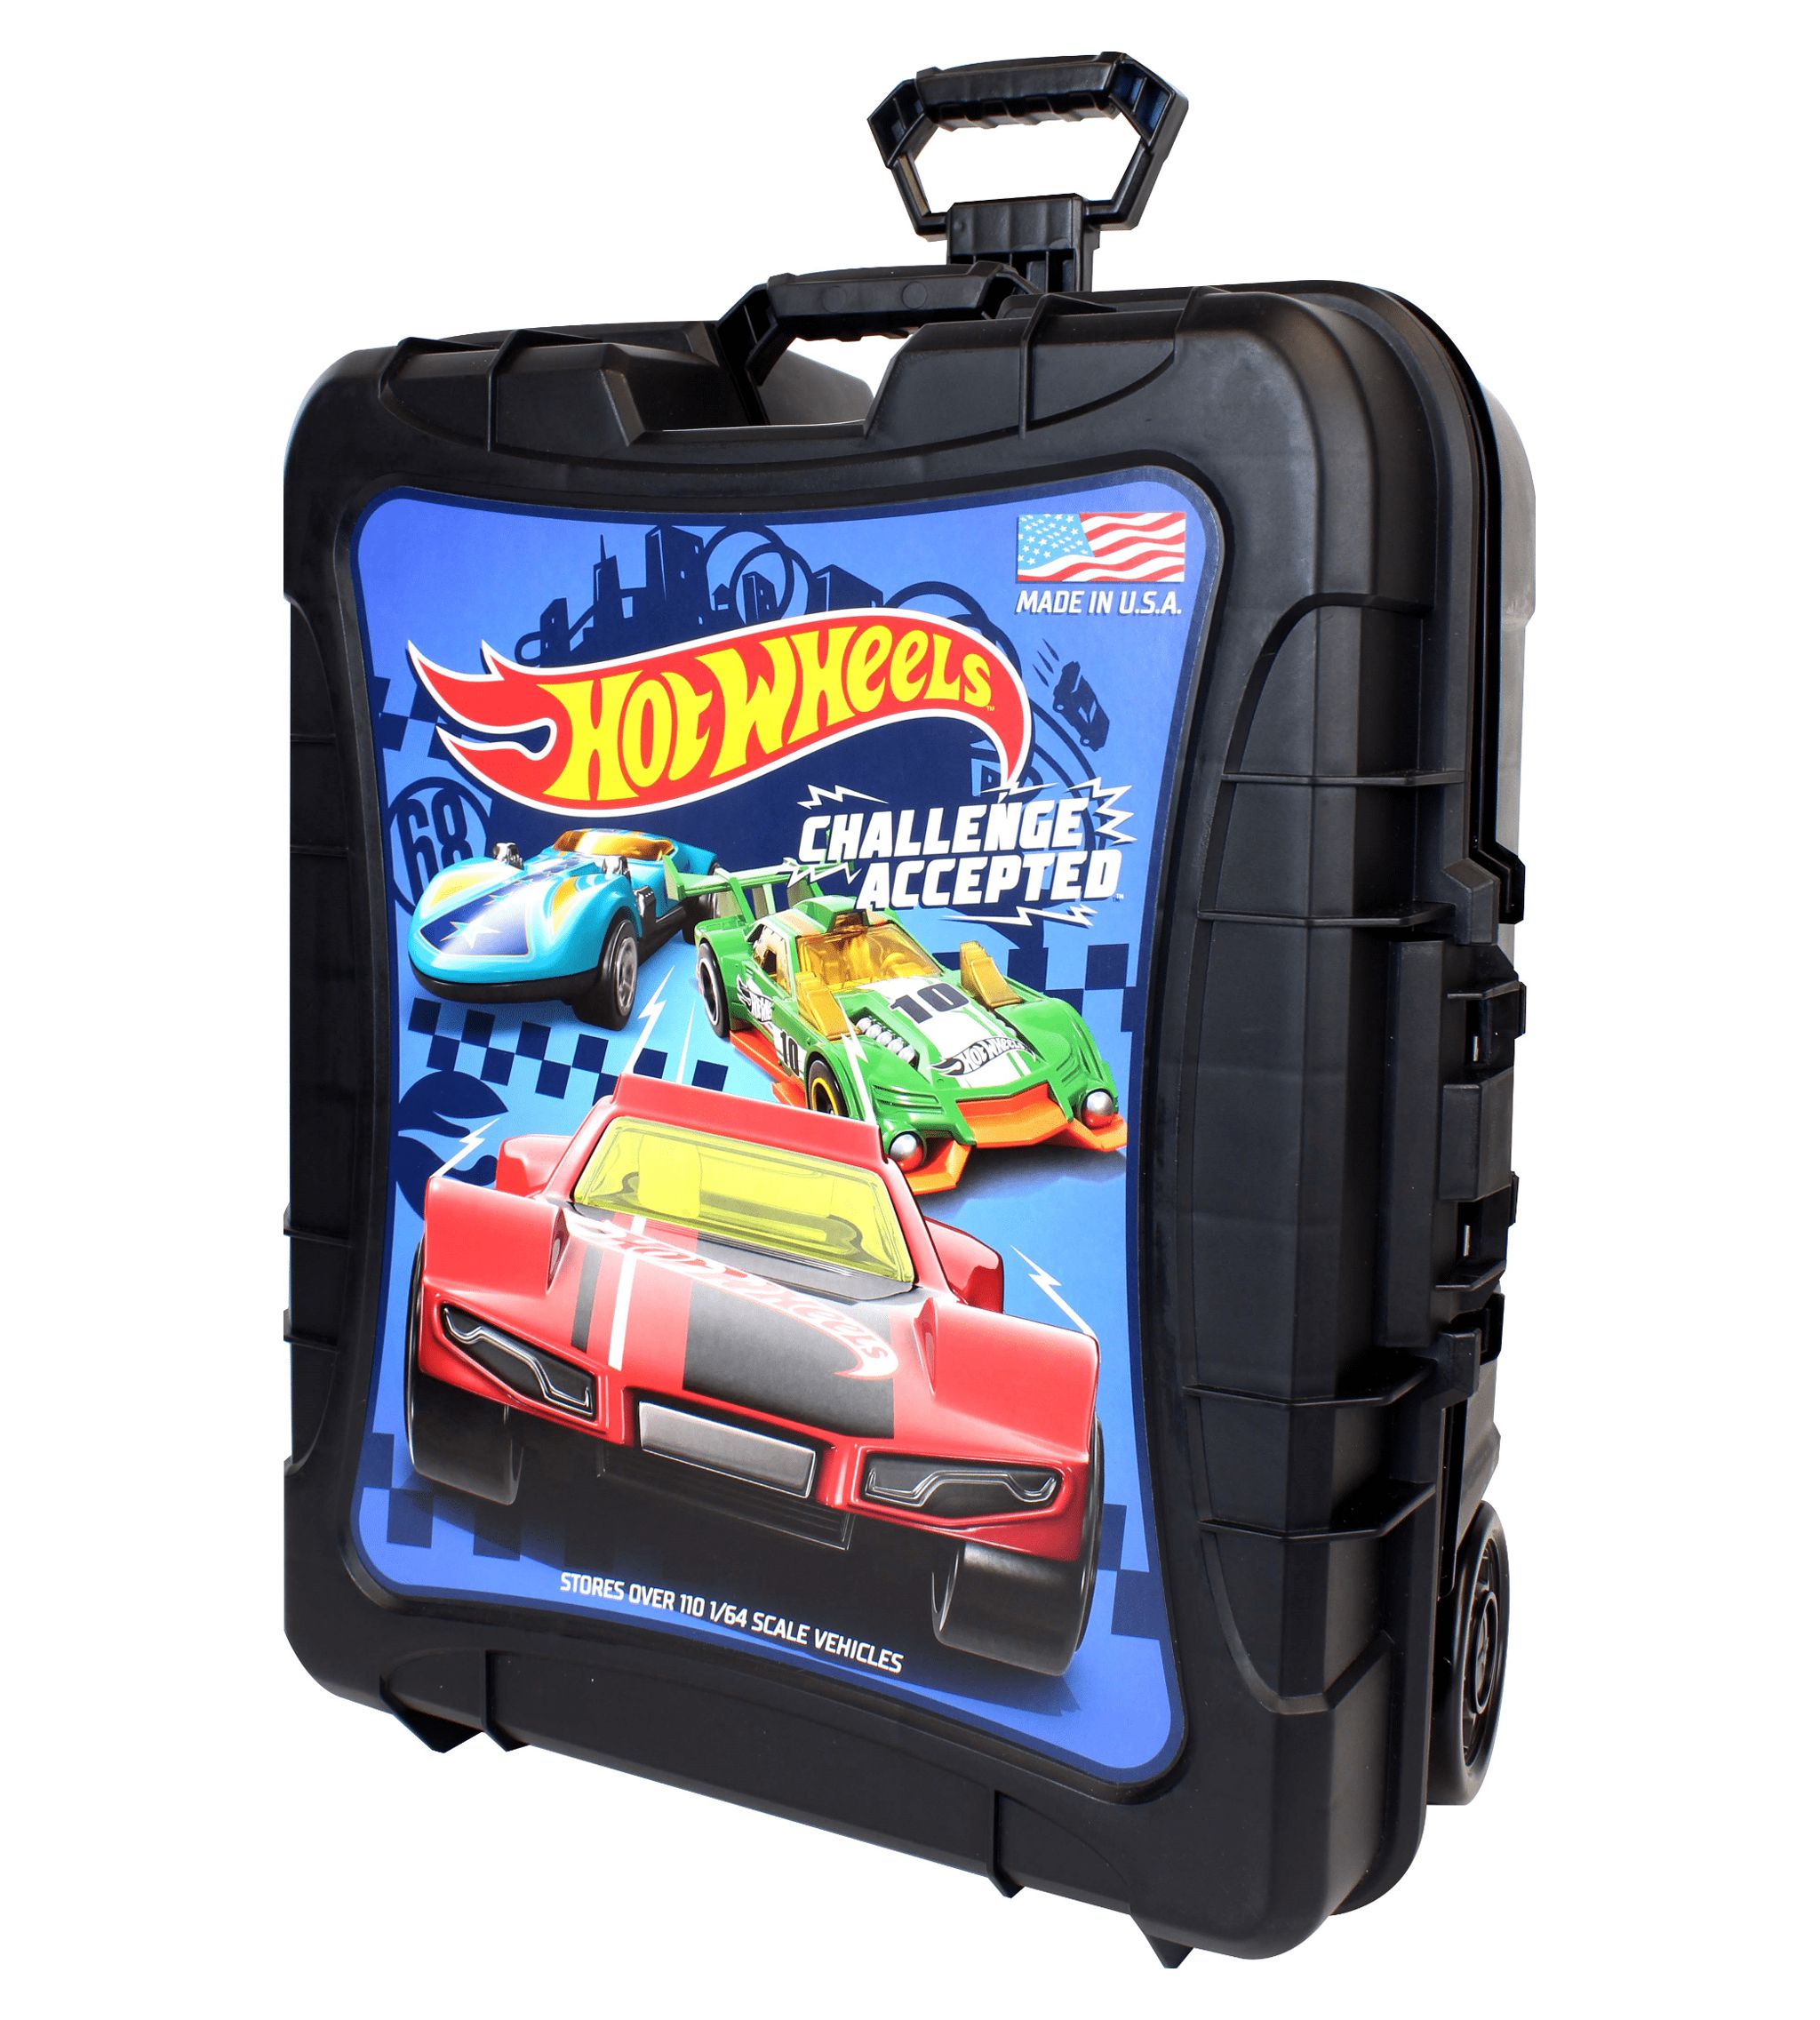 Hot Wheels 110 Vehicle Playsets Plastic Carrying Case in Black, for Child Ages 3+ - image 1 of 5